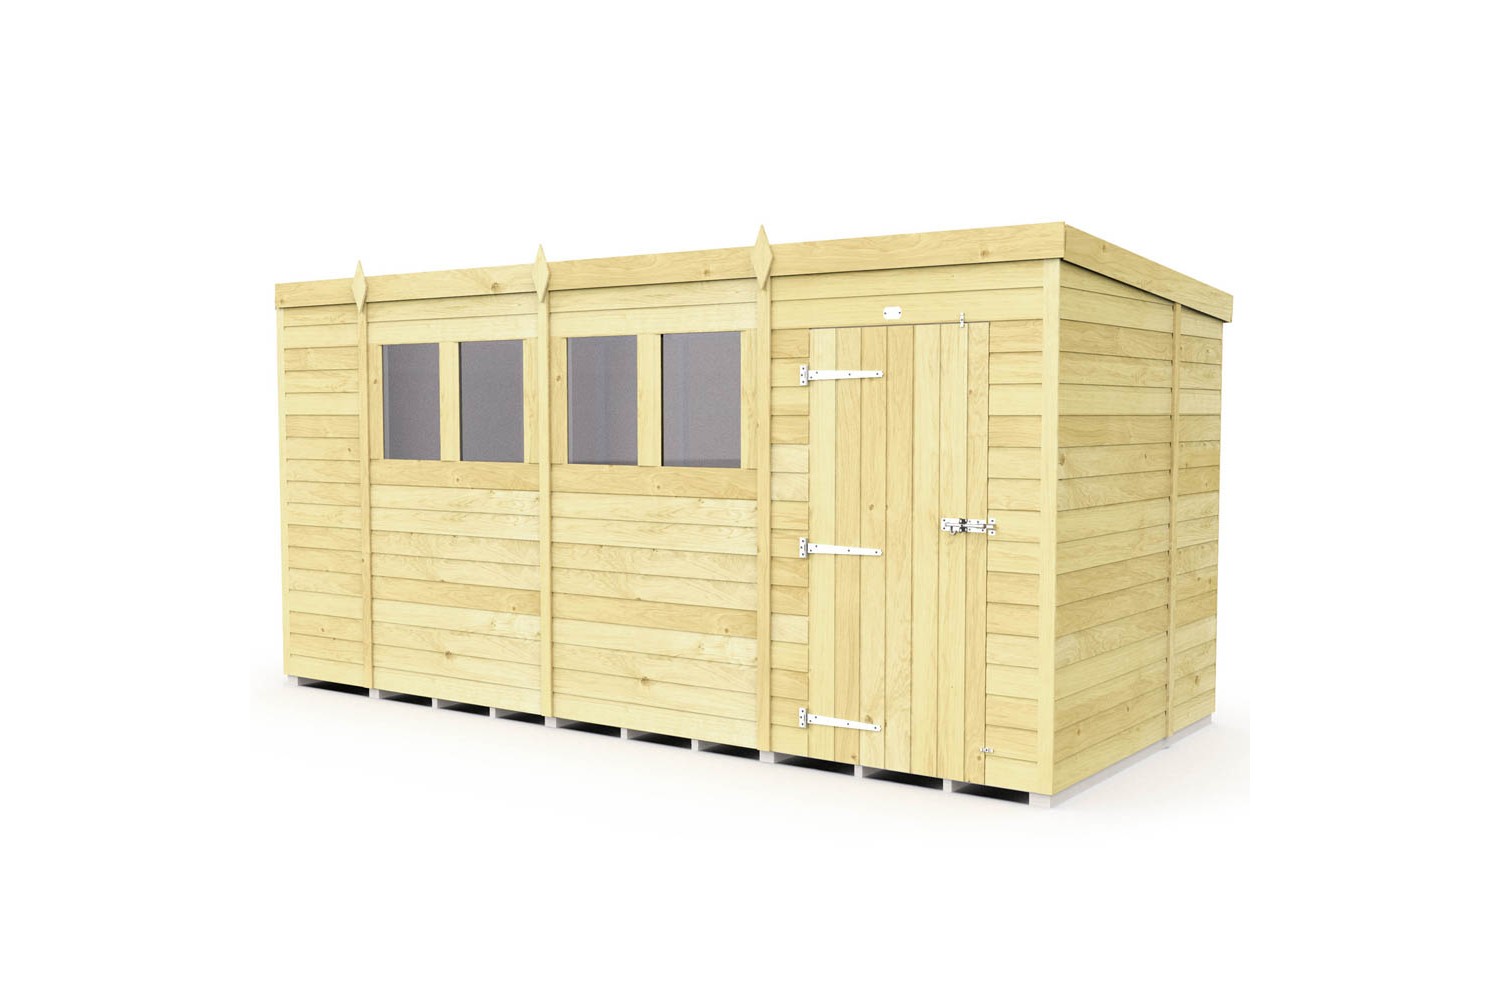 14ft x 6ft Pent Shed